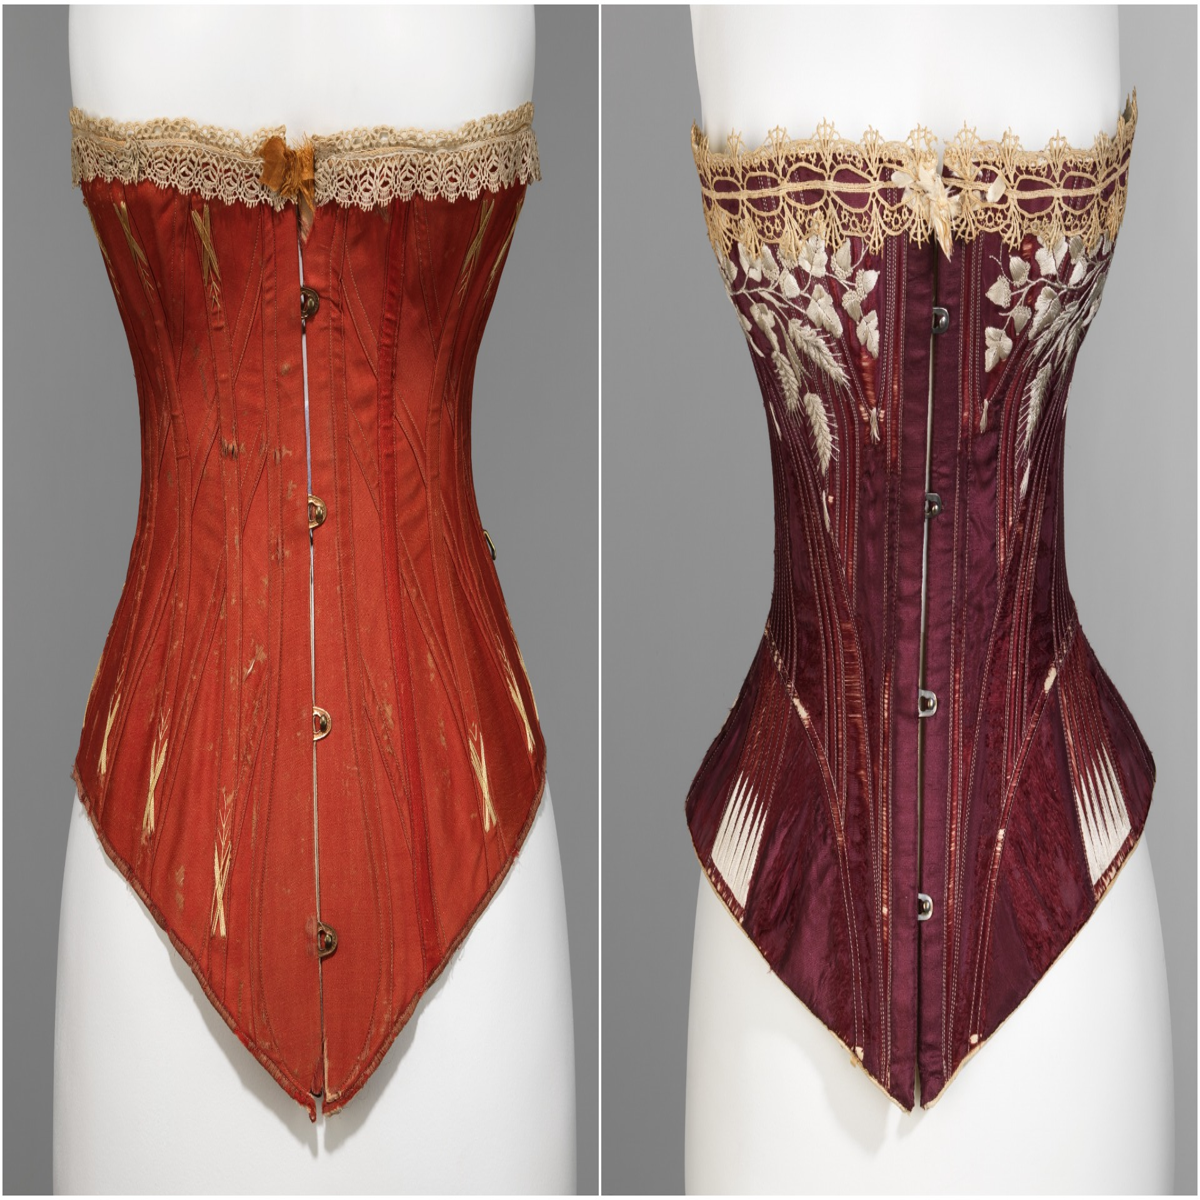 Corsets for Men – Lucy's Corsetry